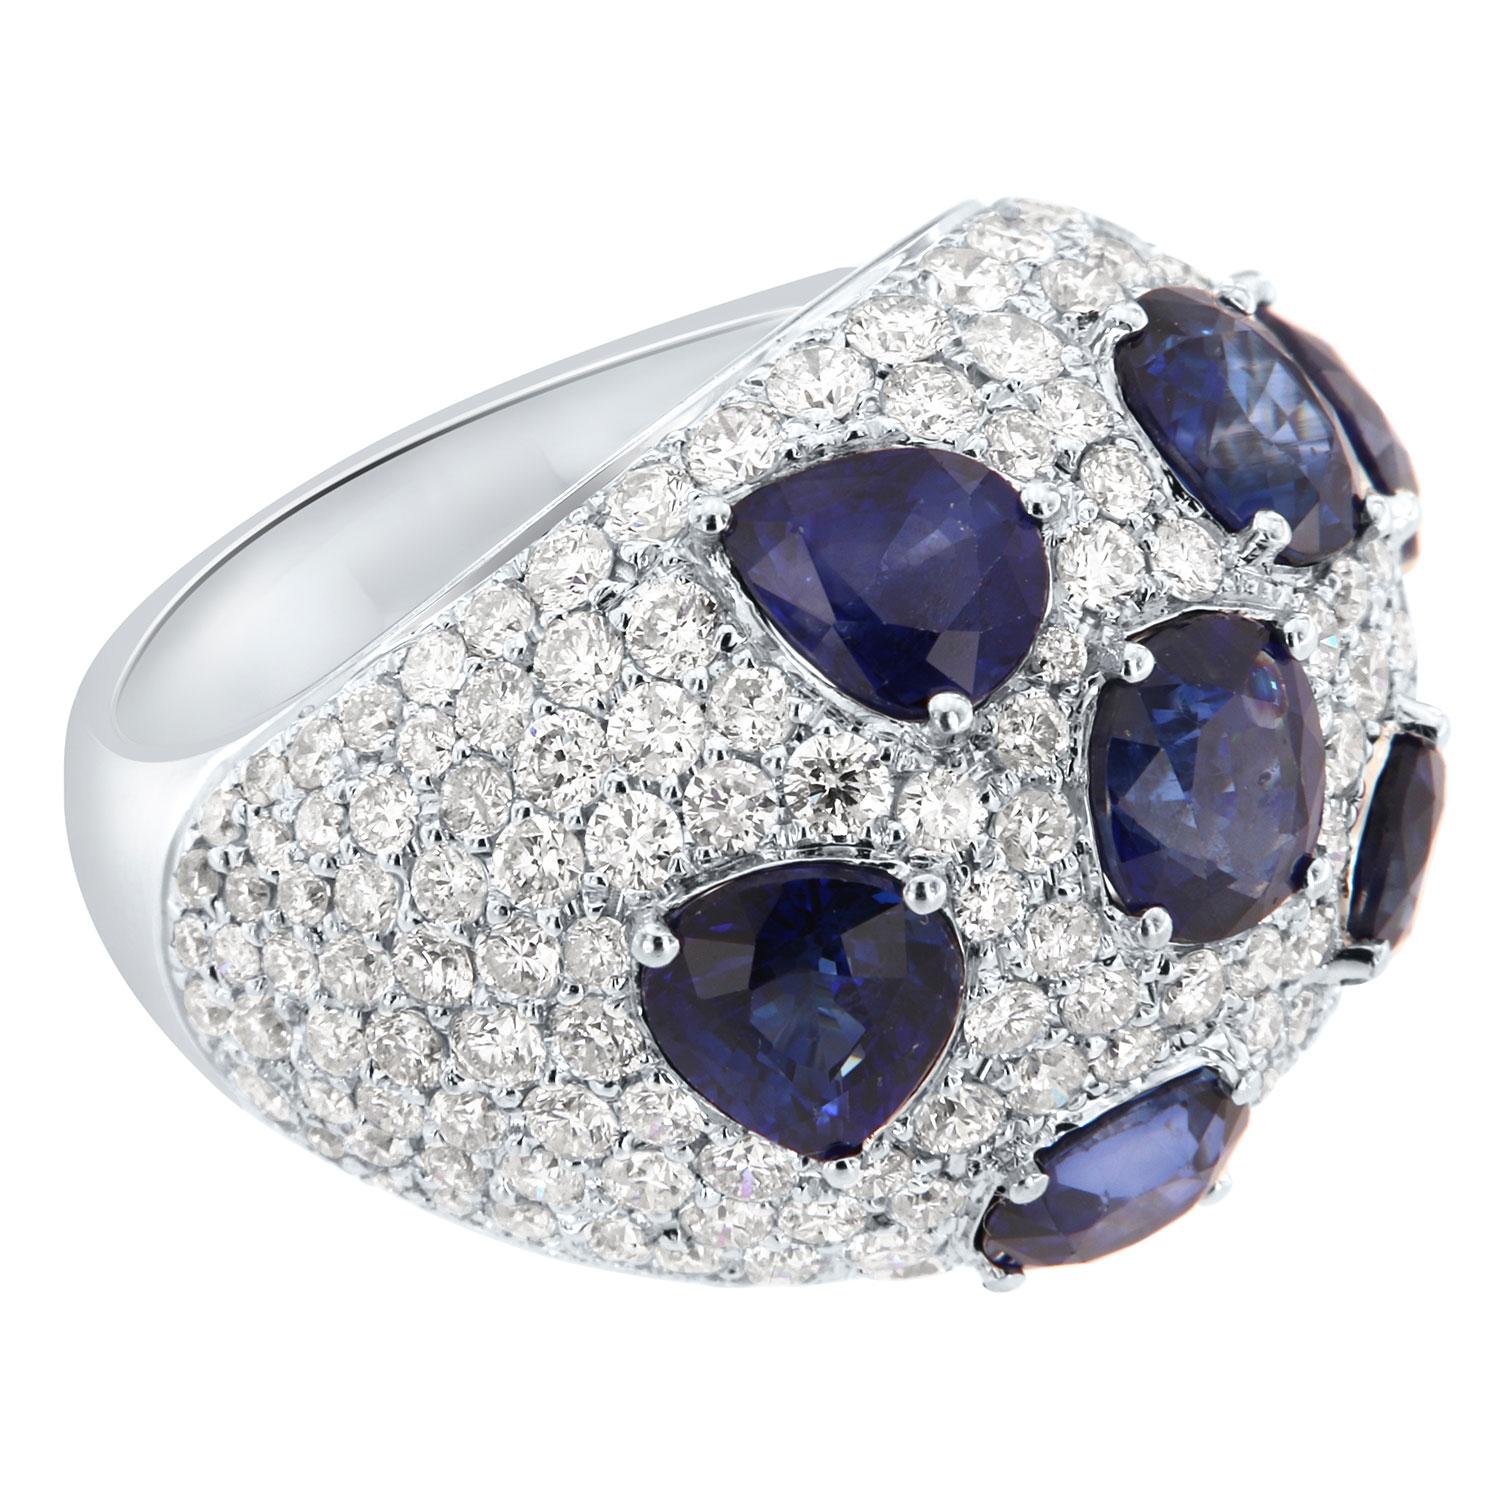 Oval Cut 18K White Gold Sapphire & Diamonds Ring '11.42 Carat Total Weight' For Sale